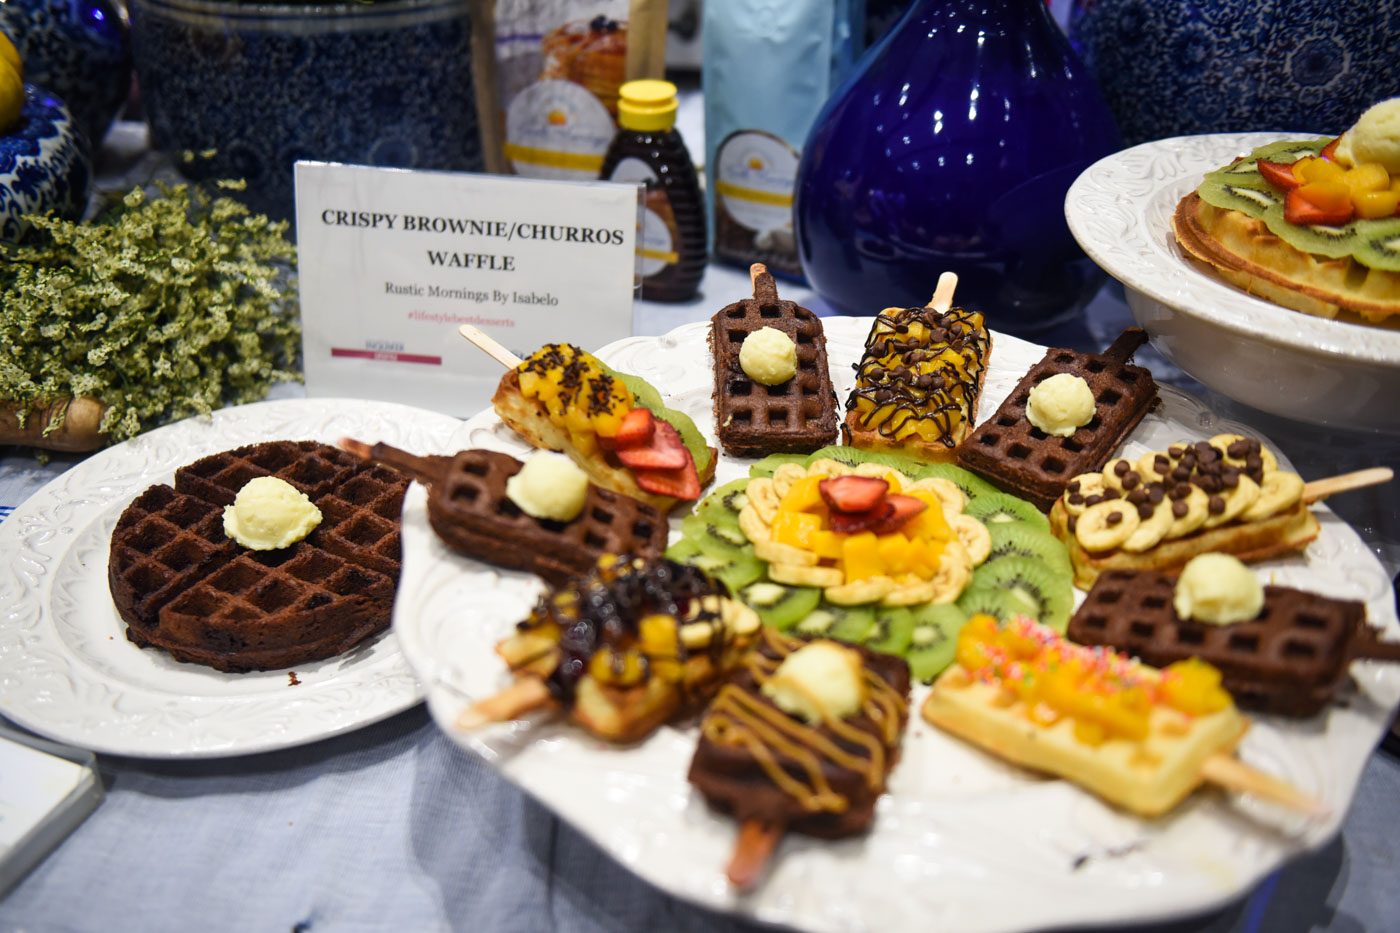 Cripsy Brownie/Churros Waffle by Rustic Mornings by Isabelo. Photo by Alecs Ongcal/Rappler 